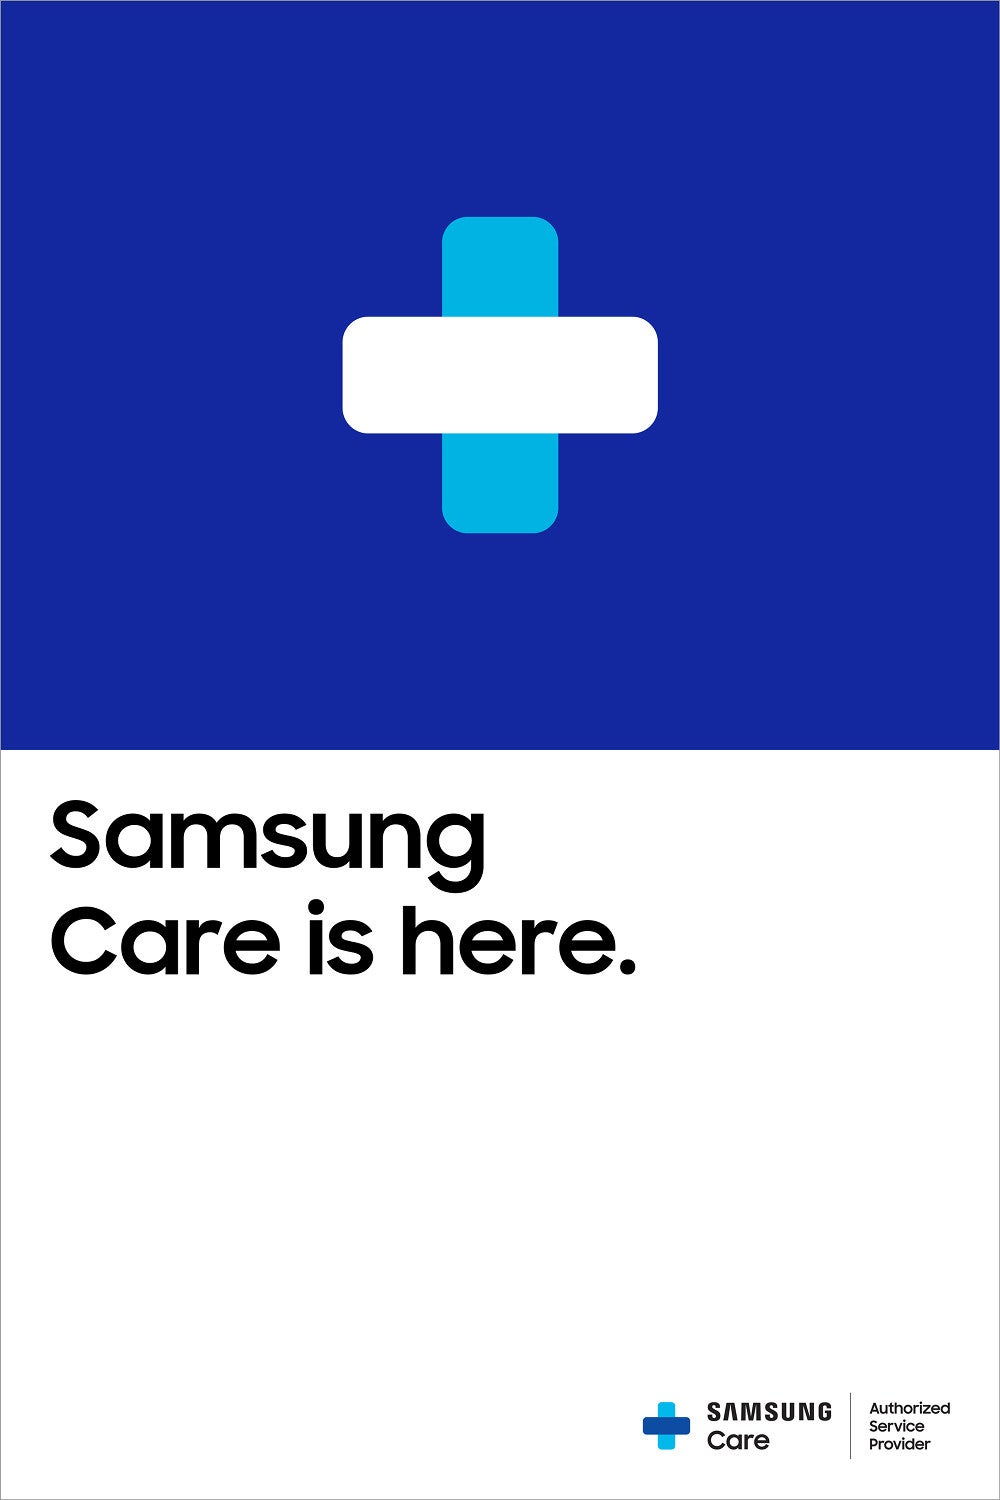 Samsung to offer in-person service for Galaxy smartphones in the United States